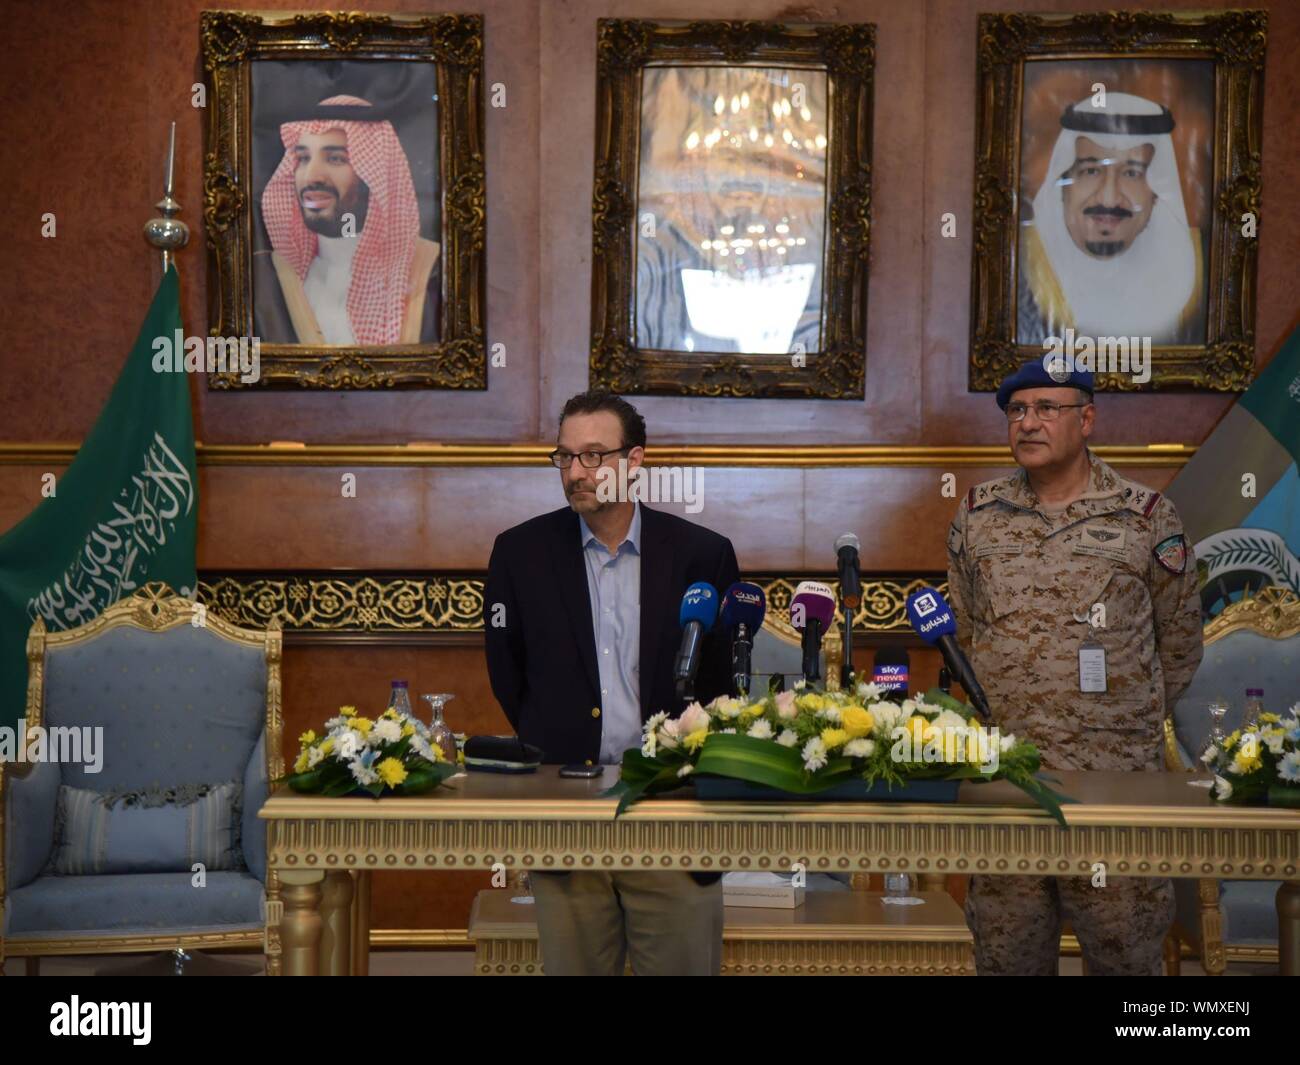 Riyadh, Saudi Arabia. 5th Sep, 2019. U.S. Assistant Secretary of Near Eastern Affairs David Schenker (L) attends a press conference at a military facility in Al Kharj, south of Riyadh, Saudi Arabia, on Sept. 5, 2019. David Schenker said on Thursday that the United States is in talks with Yemen's Houthi rebels in a bid to end the country's civil war. Credit: Tu Yifan/Xinhua/Alamy Live News Stock Photo